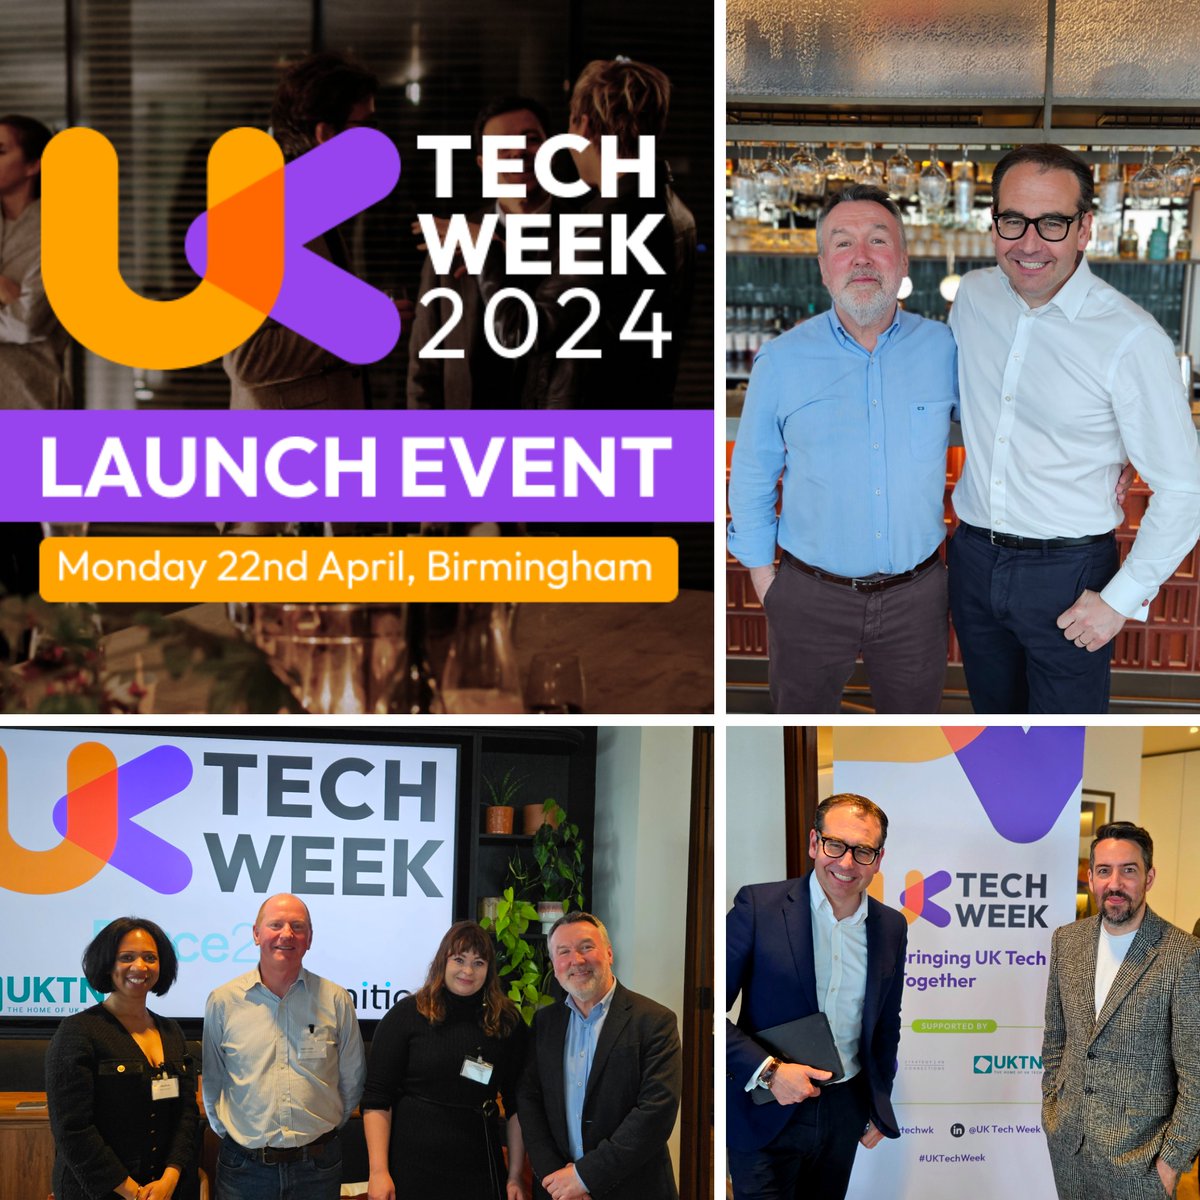 A fantastic afternoon of joining the dots across the UK with the launch of the inaugural UK Tech Week (@uktechwk). Kudos to @StuartClarkeUK and team for shining a spotlight on the hundreds of programmes, organisations and campaigns across UK tech and beyond! #UKTechWeek 🇬🇧 🌎